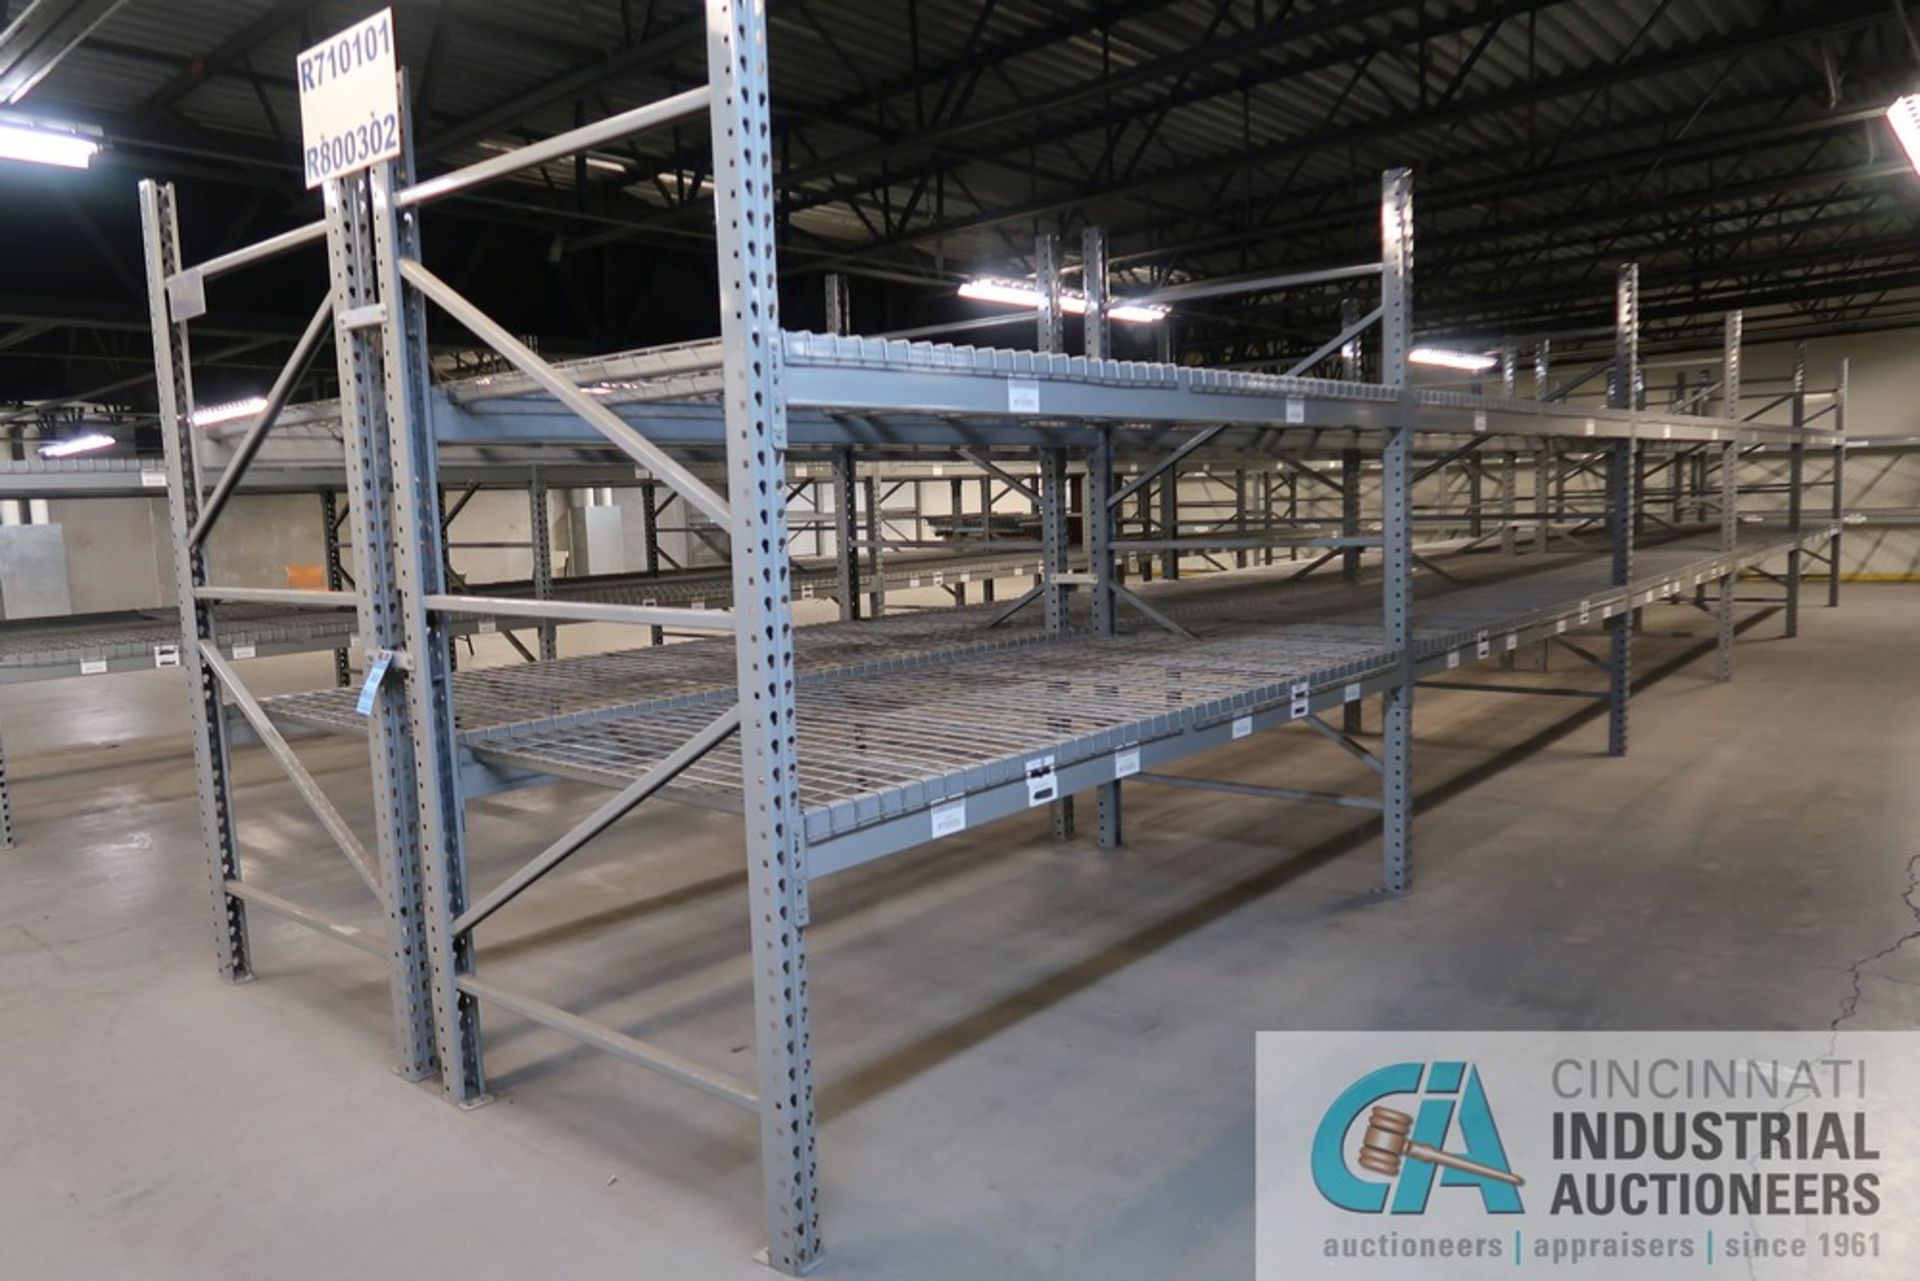 SECTIONS 50" X 108" X 96" HIGH SPACERAK TEAR DROP STYLE ADJUSTABLE BEAM PALLET WITH WIRE DECKING